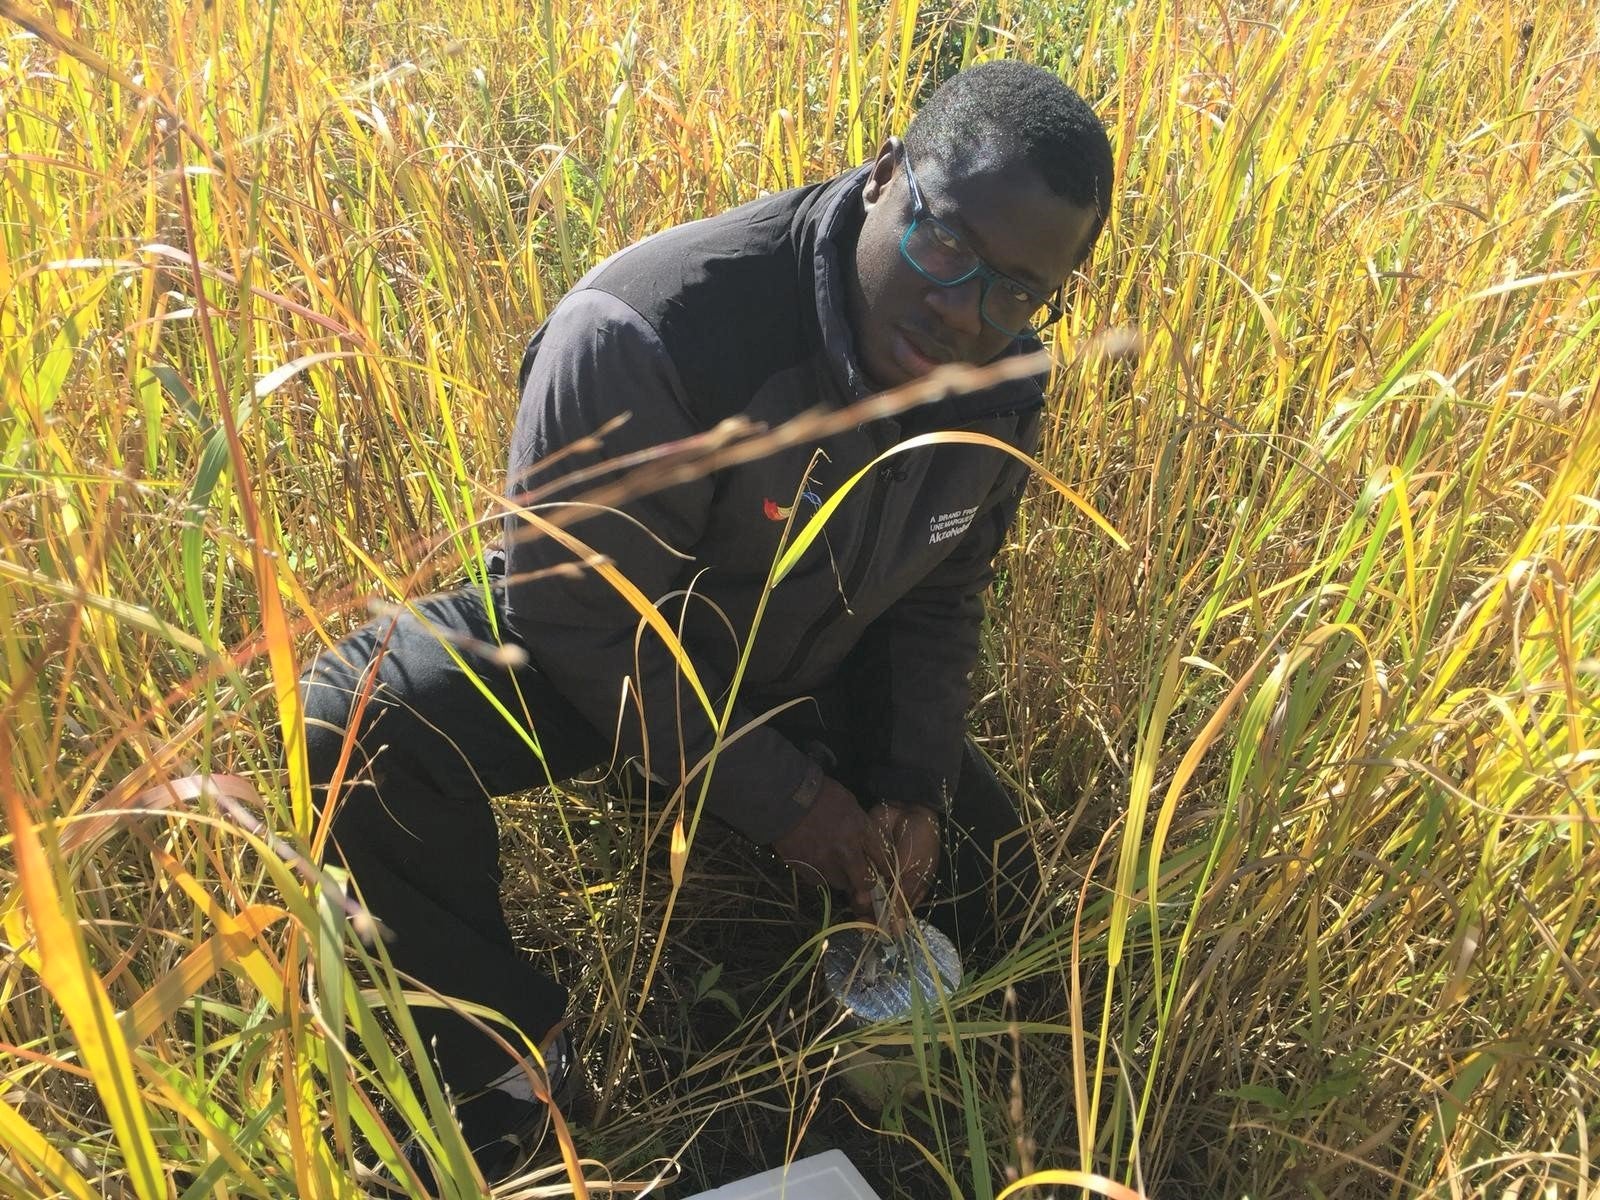 person taking a sample surrounded by tall grasses